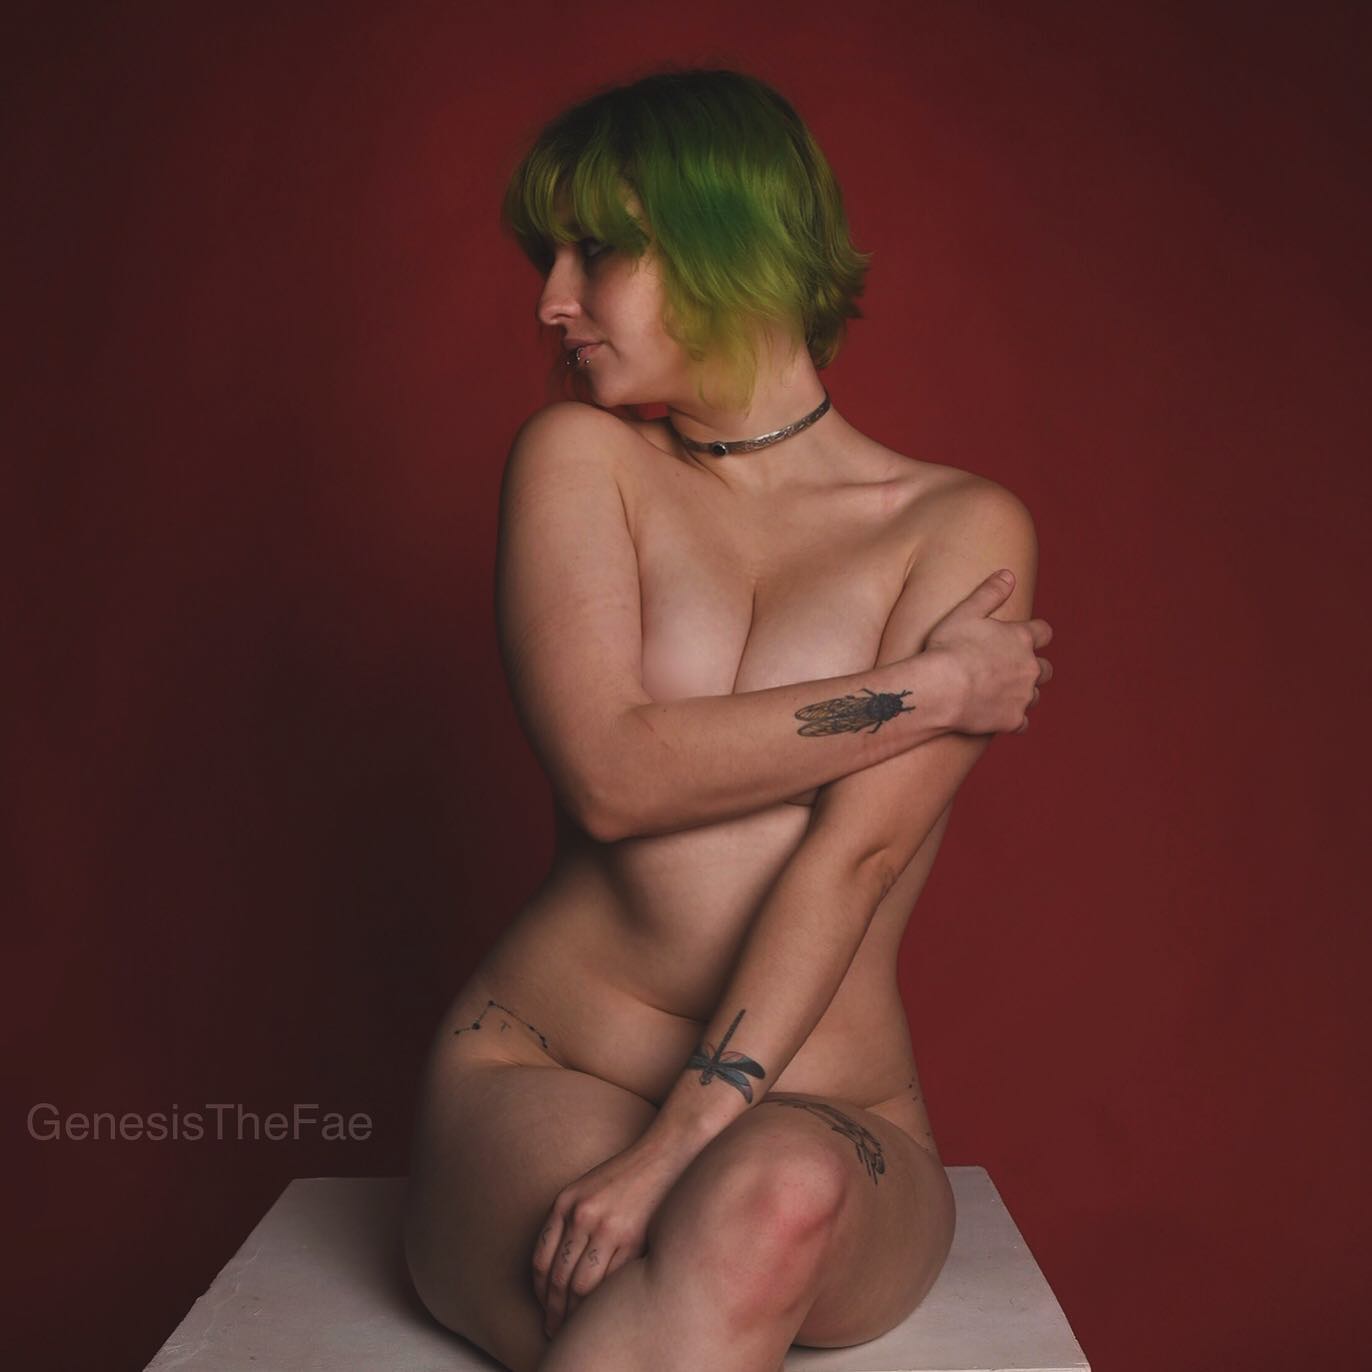 Finally done with this row from a shoot with @colombo_photography last January. 

So much has changed since then. I’m excited to get to some newer stuff! 

.
.
.
#genesisthefae #atlantamodel #boudoir